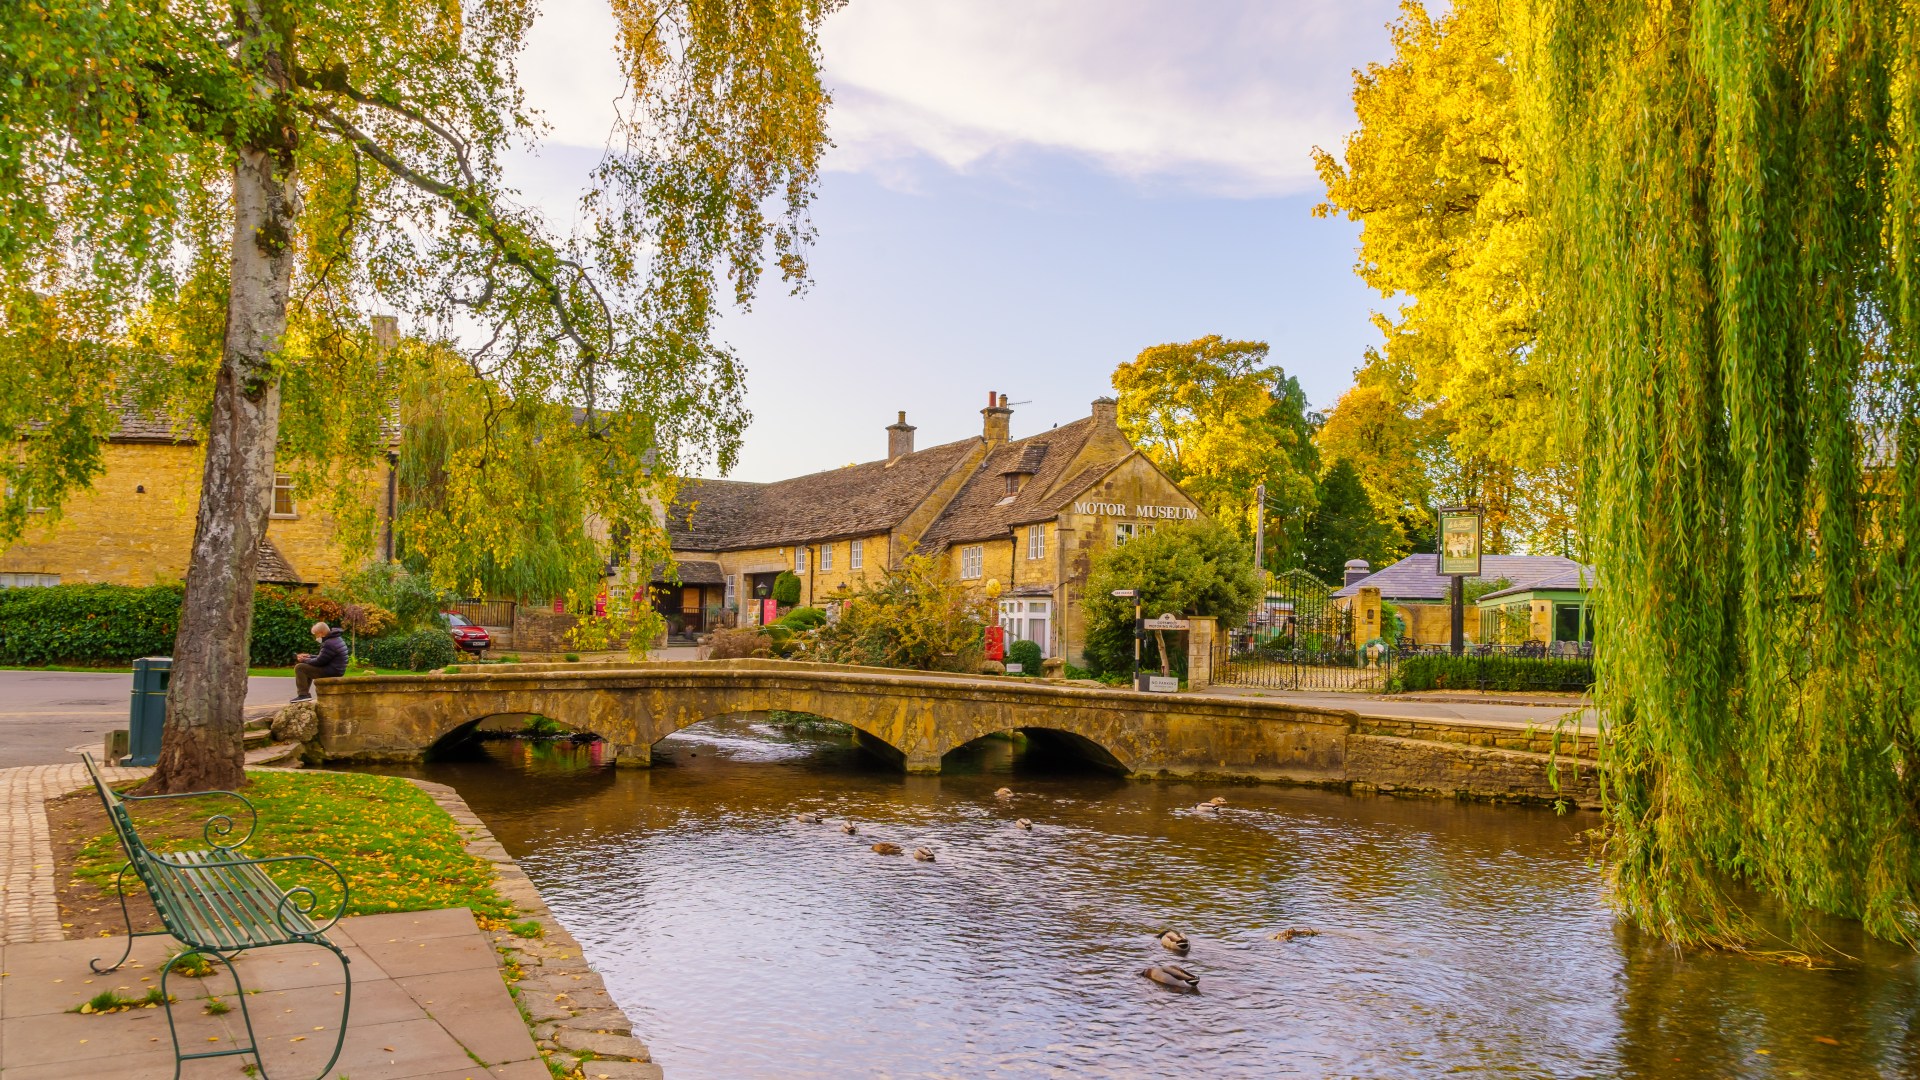 'Venice of the Cotswolds' is one of UK's most romantic villages - thanks to riverside restaurants and stargazing hotspot